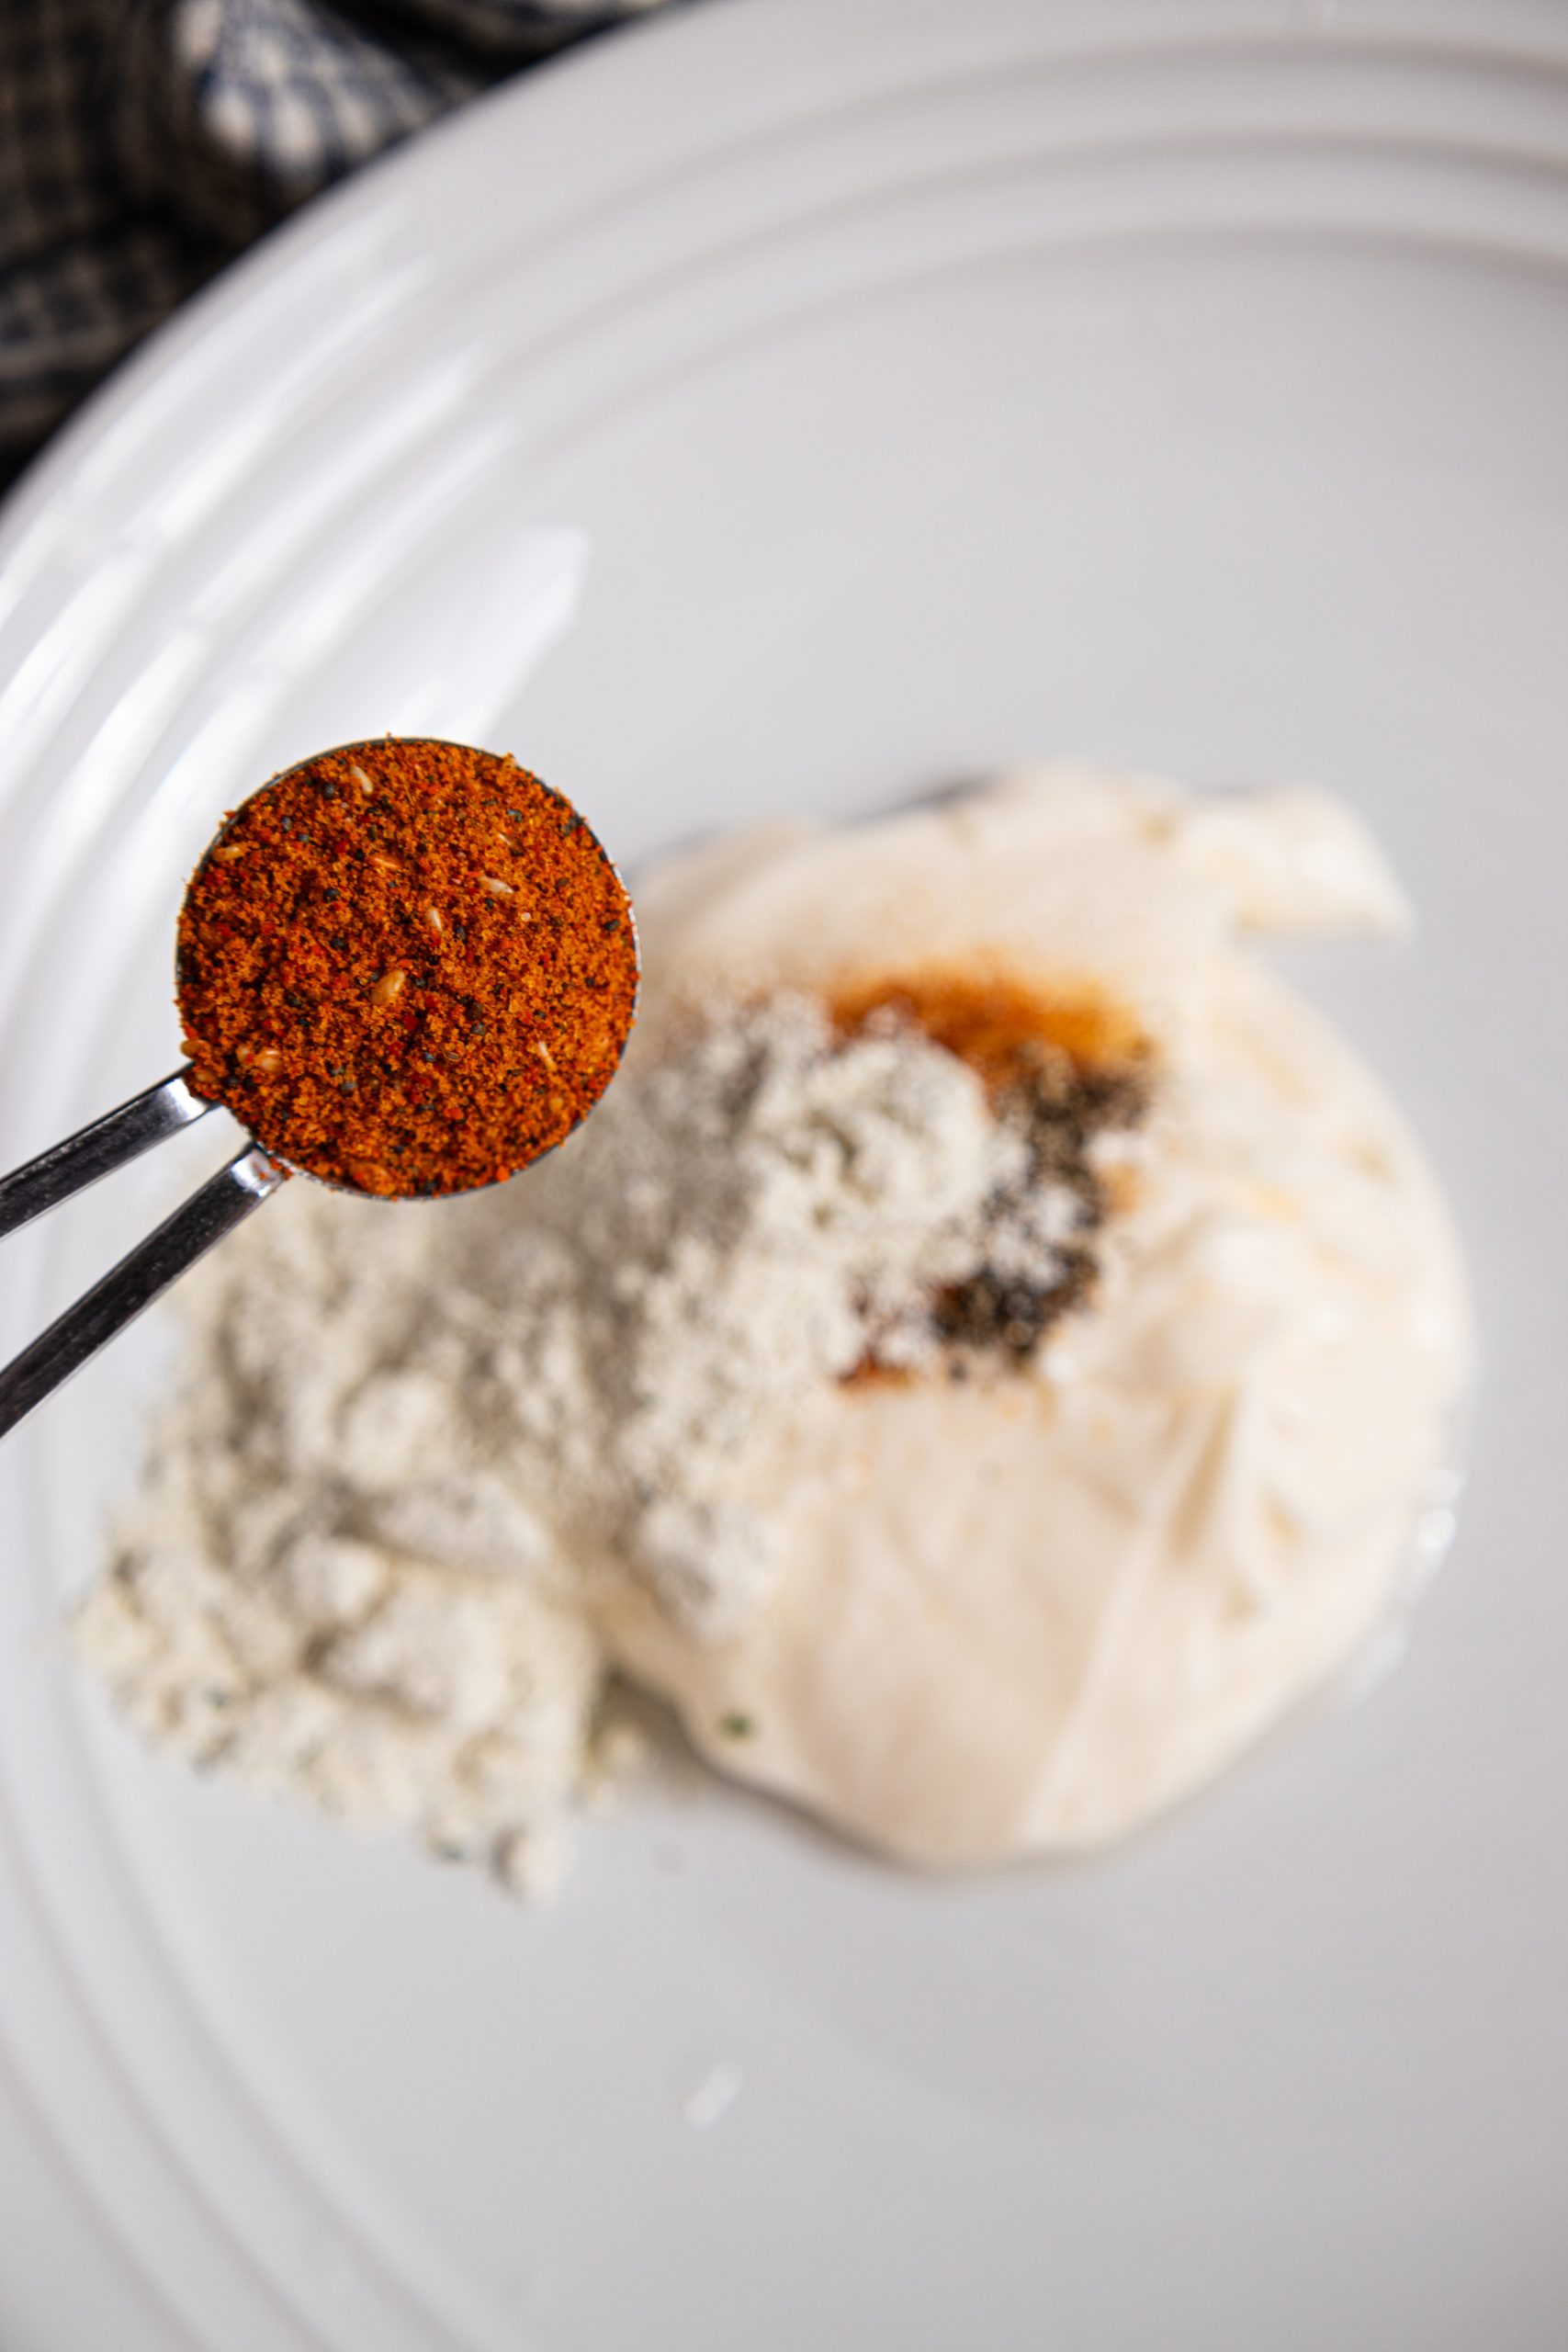 A spoon is holding a small amount of spice on a white plate.